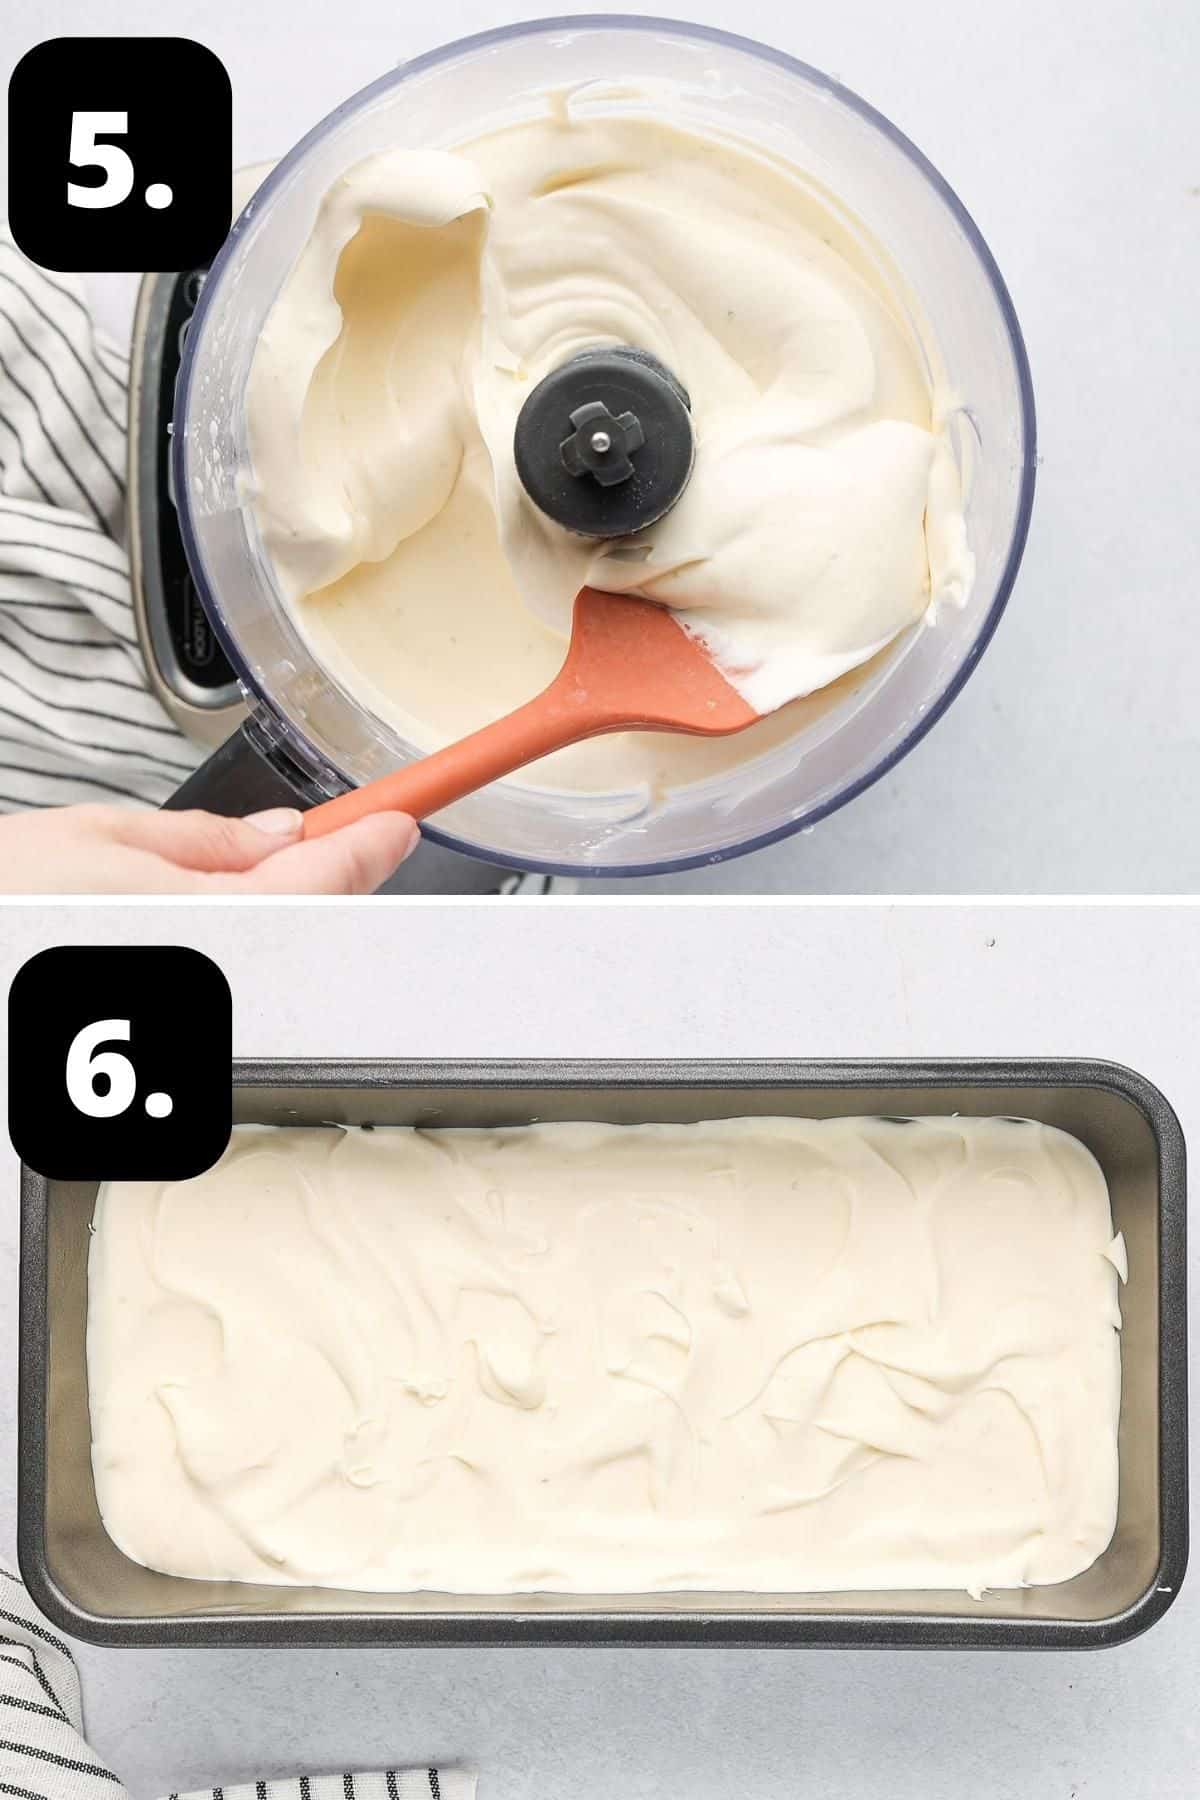 Steps 5-6 of preparing this recipe - the thickened cream mixture in the processor and in a dish ready for the freezer.